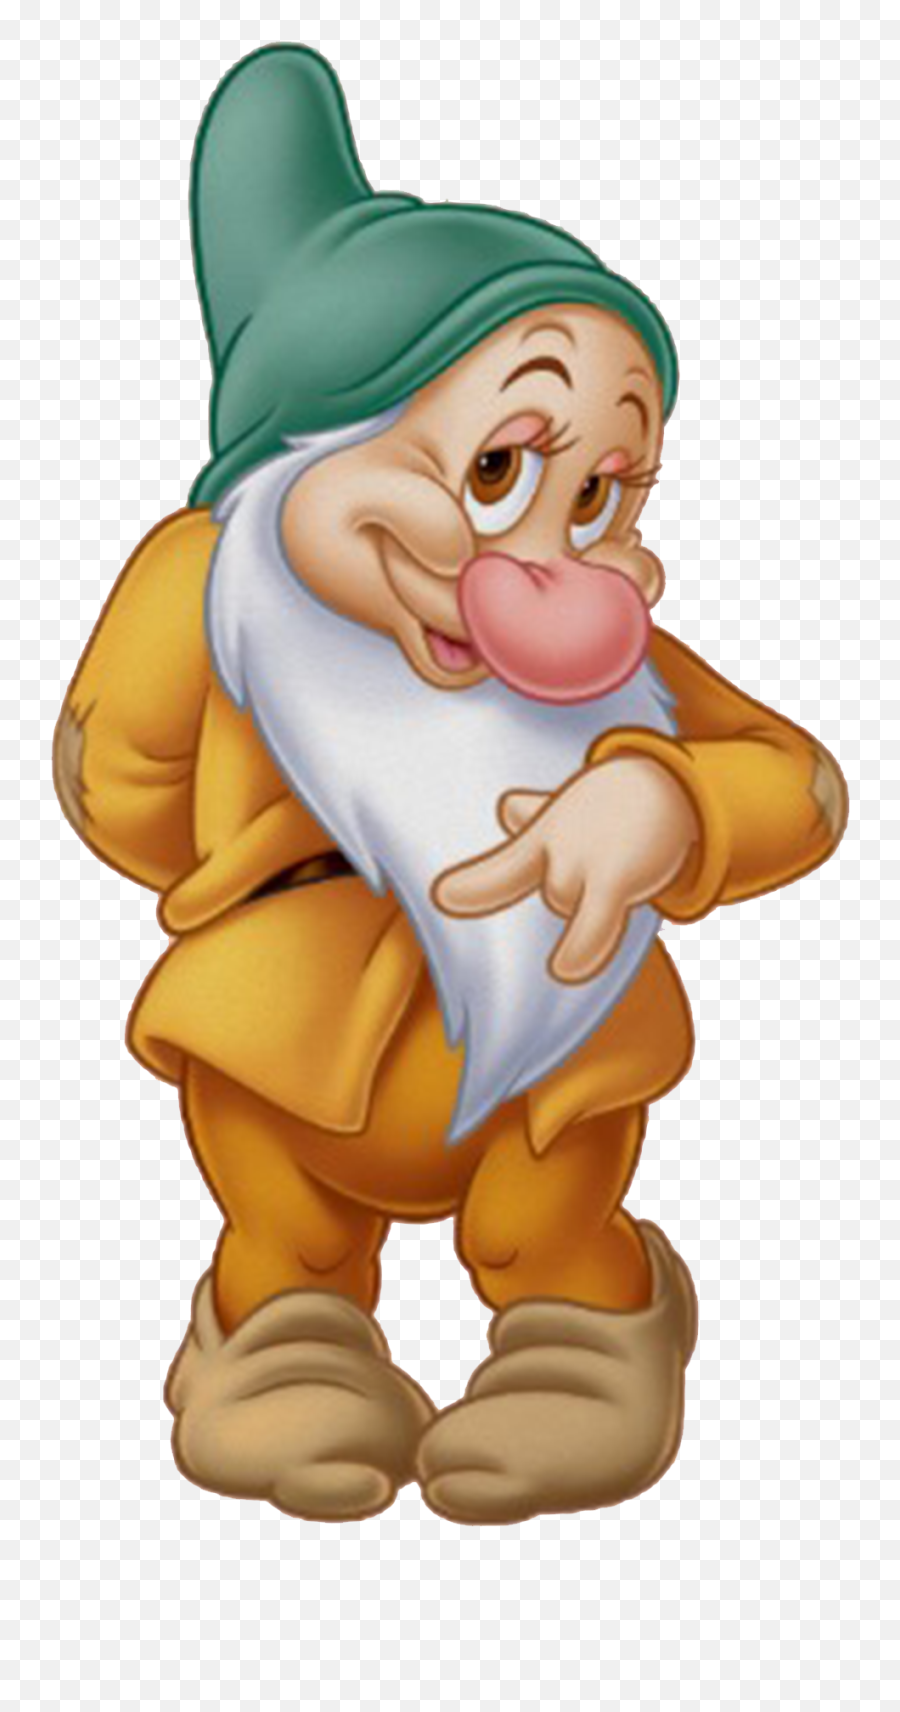 Download Dwarf Png Image For Free - Snow White And The Seven Dwarfs Bashful,Midget Png